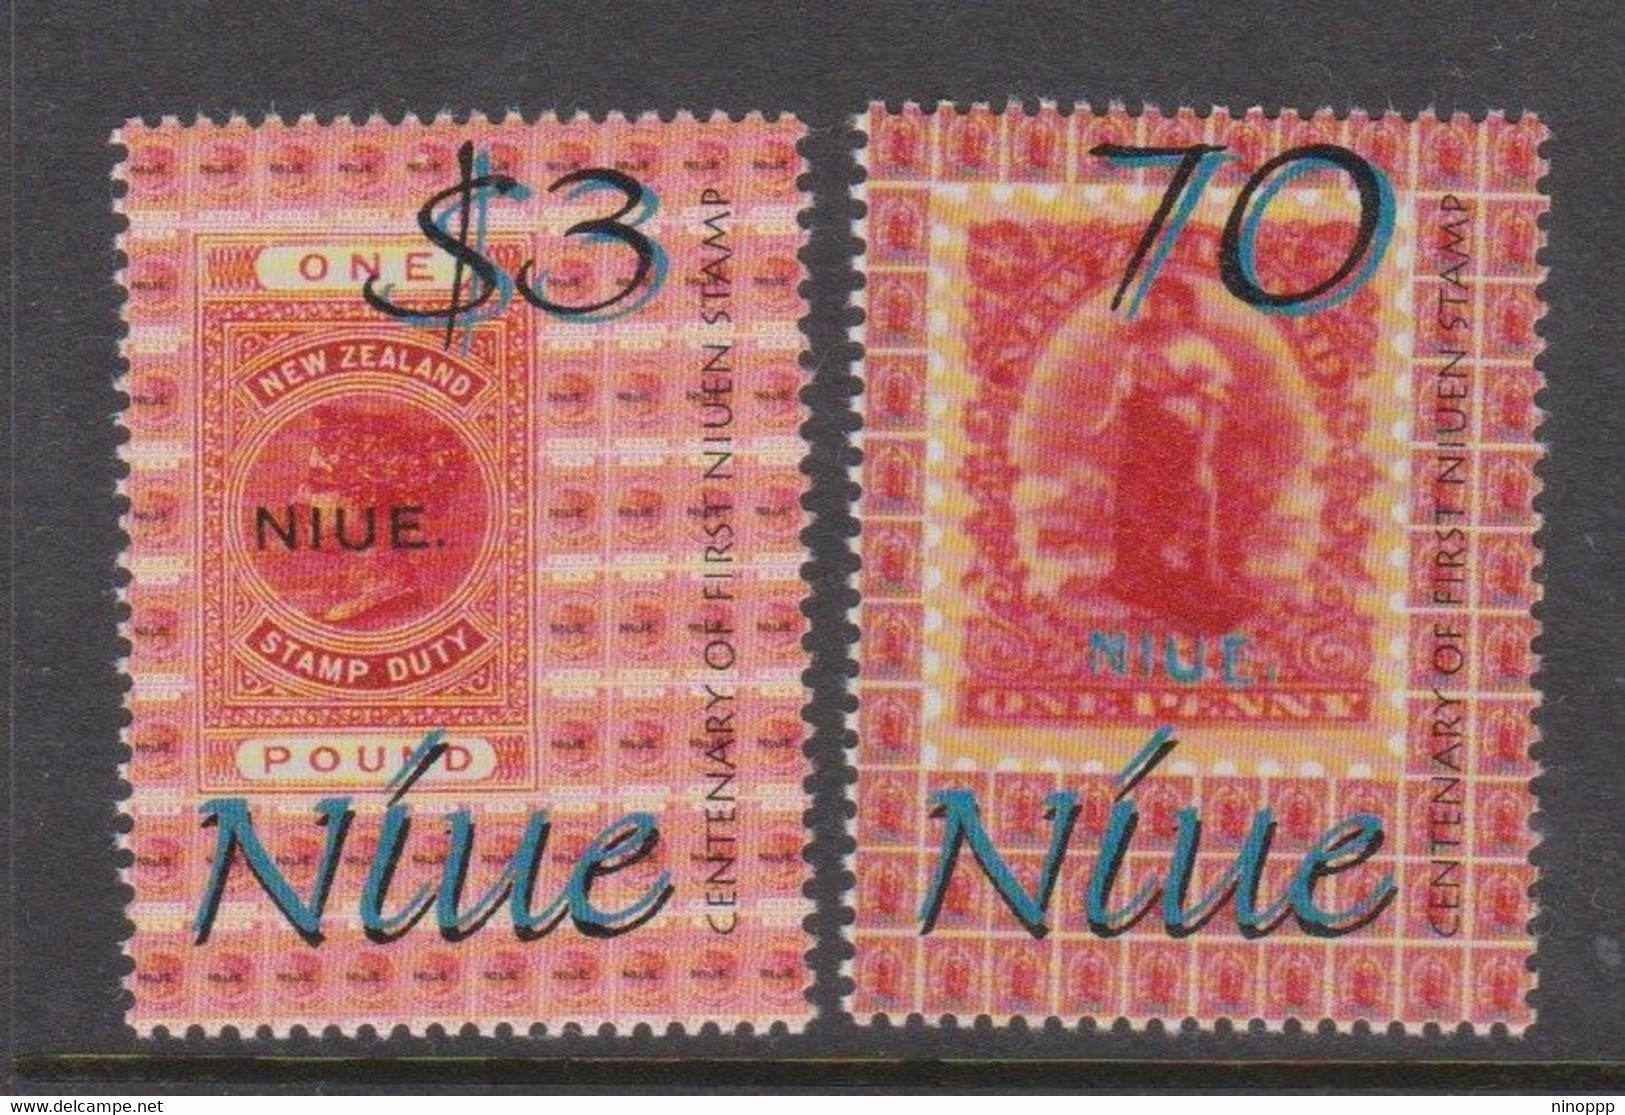 Niue  956-57 2001 100th Anniversary First Stamp Mint Never Hinged - Niue